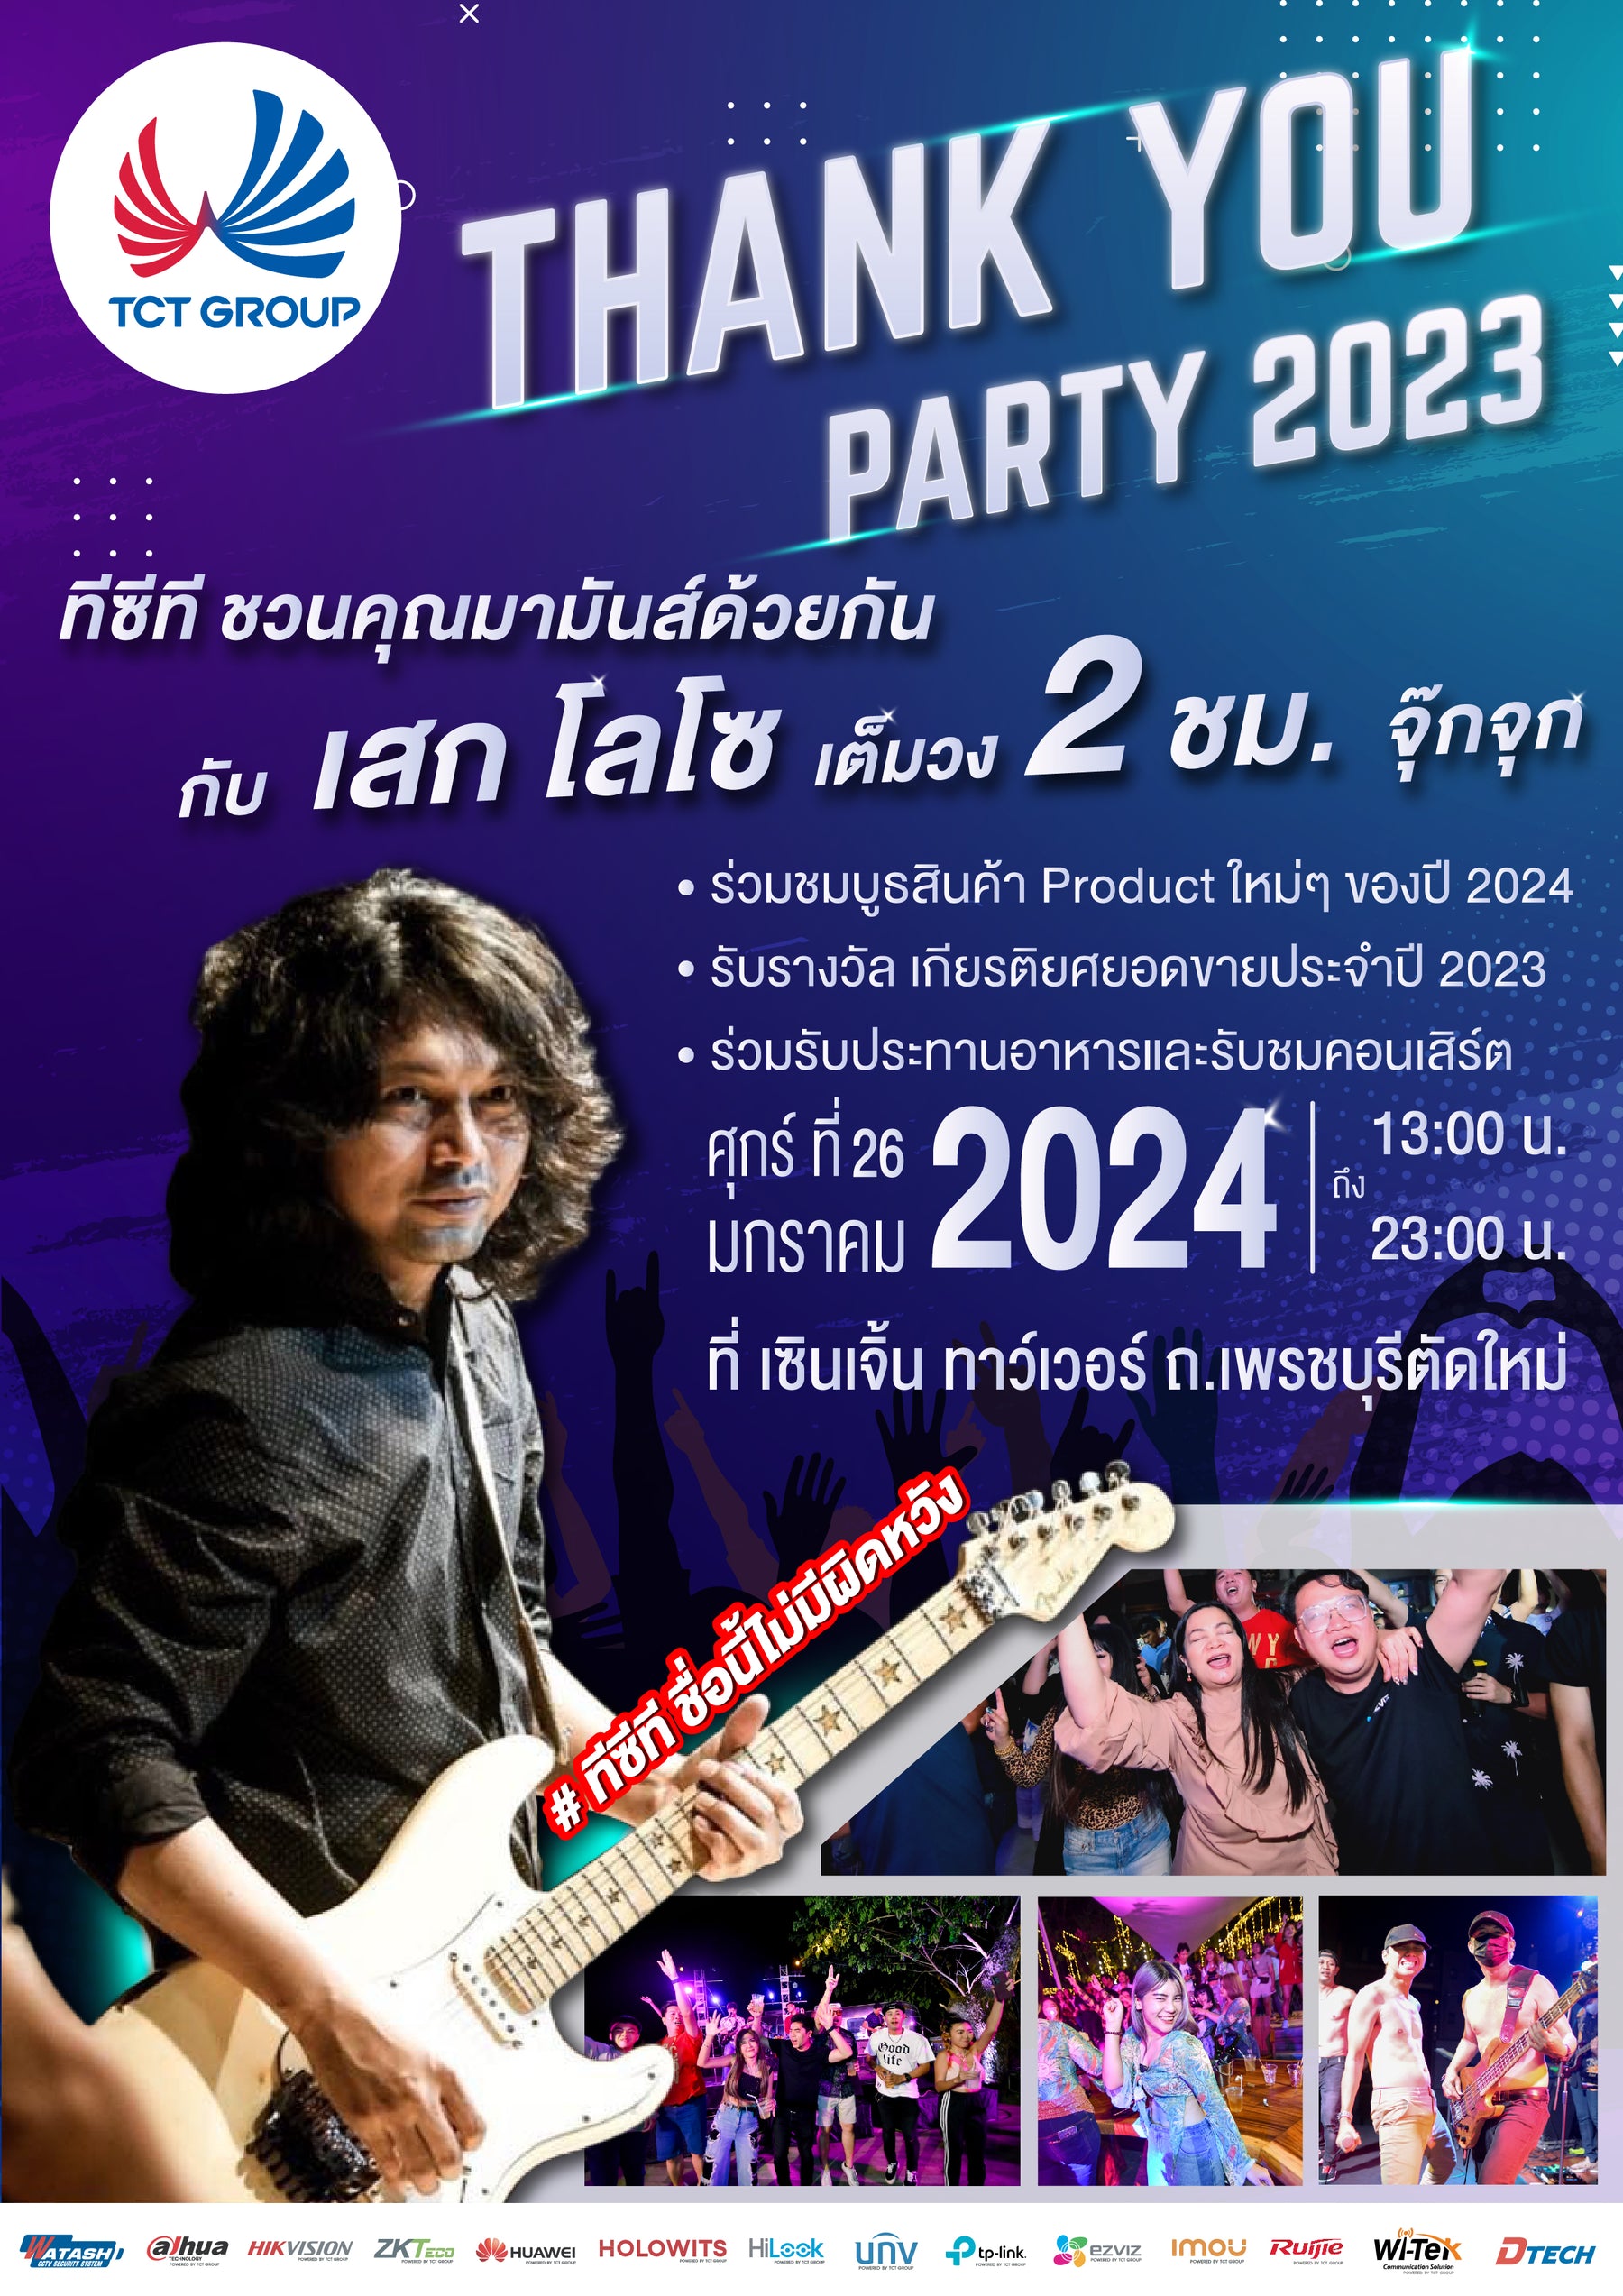 TCT Thank You Party 2023